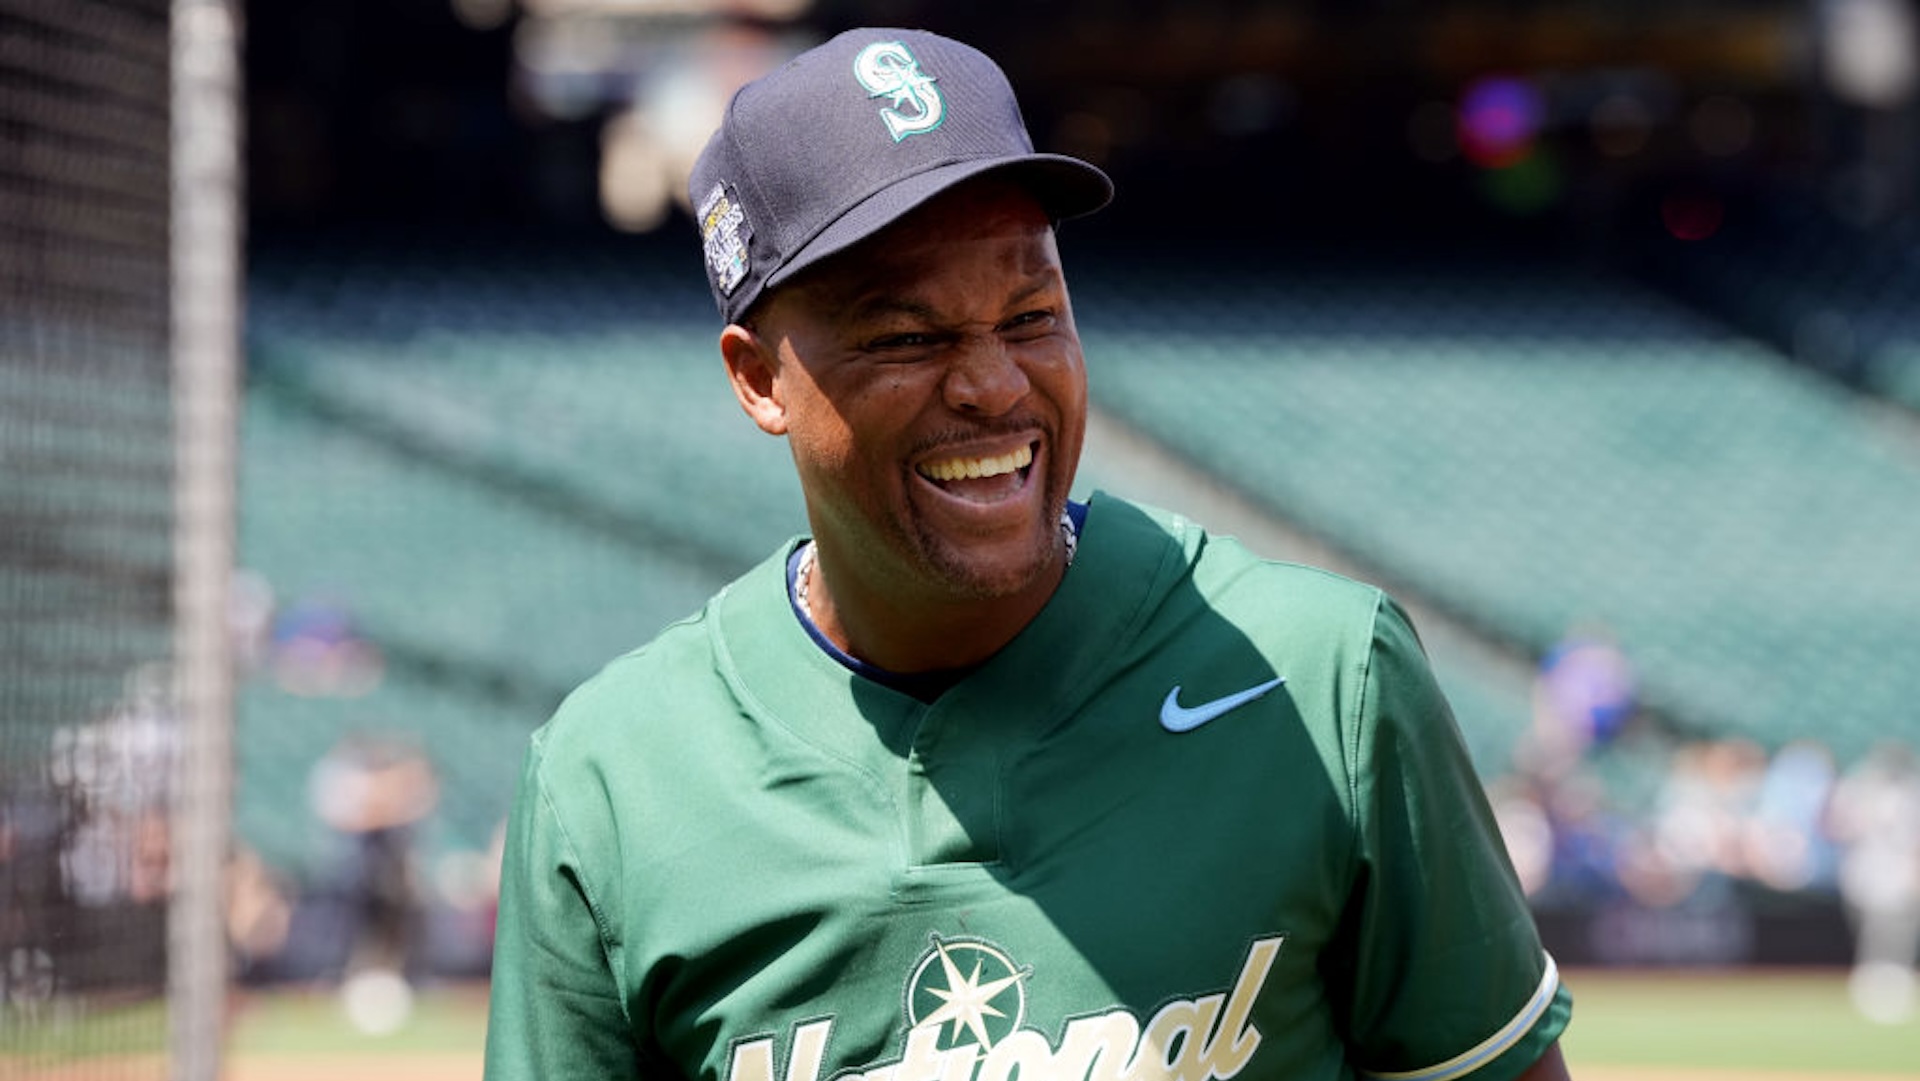 Adrian Beltre jokes around during batting practice prior to the SiriusXM All-Star Futures Game at T-Mobile Park on Saturday, July 8, 2023 in Seattle, Washington.